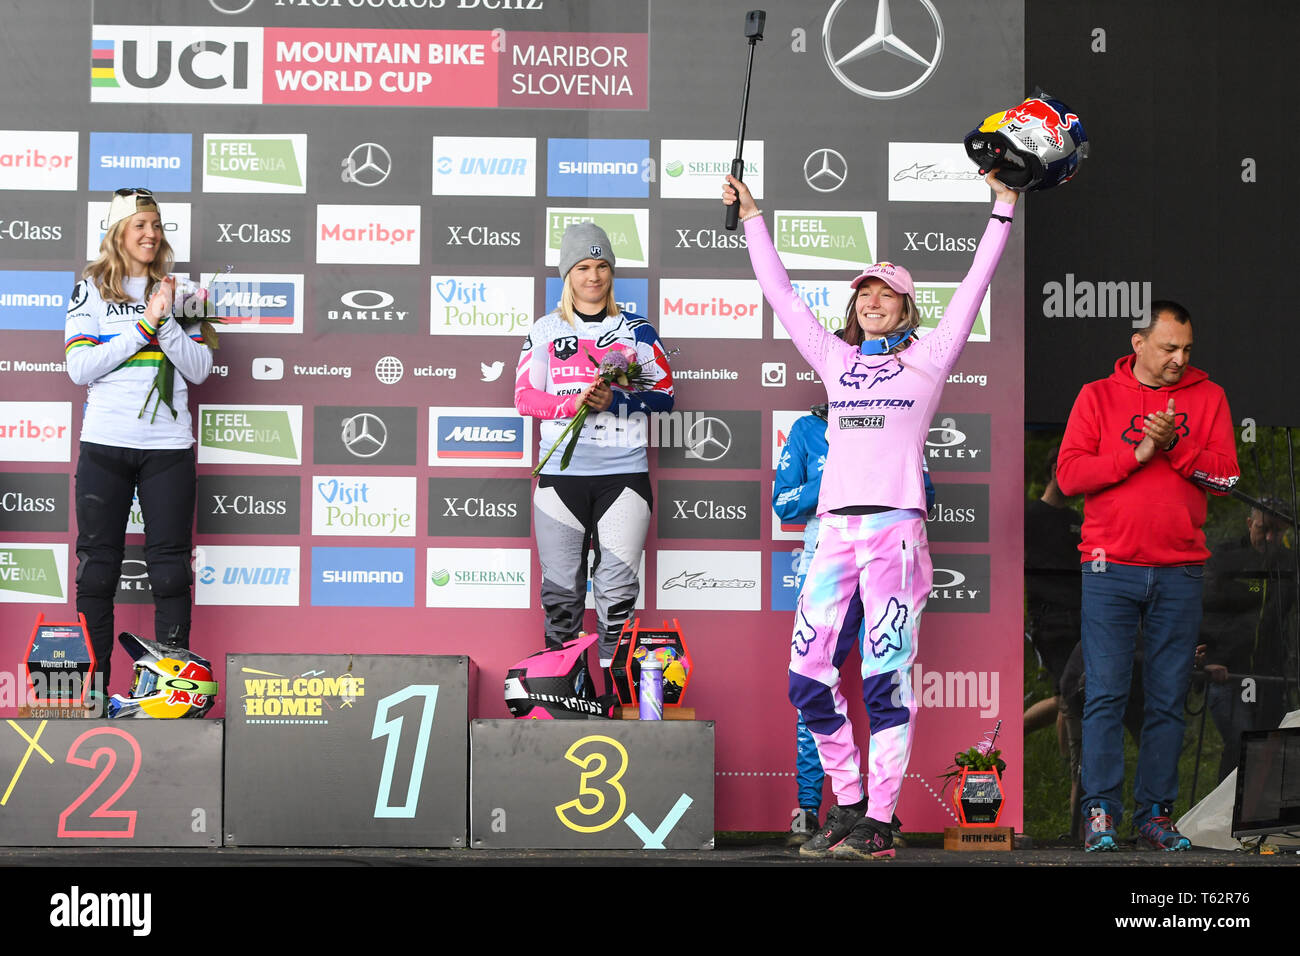 From left to right, second Rachel Atherton of Great Britain, first Tahnee Seagrave Great Britain and third Tracey Hannah are seen on the podium after the UCI Mountain Bike World Cup Finals in Maribor. Stock Photo